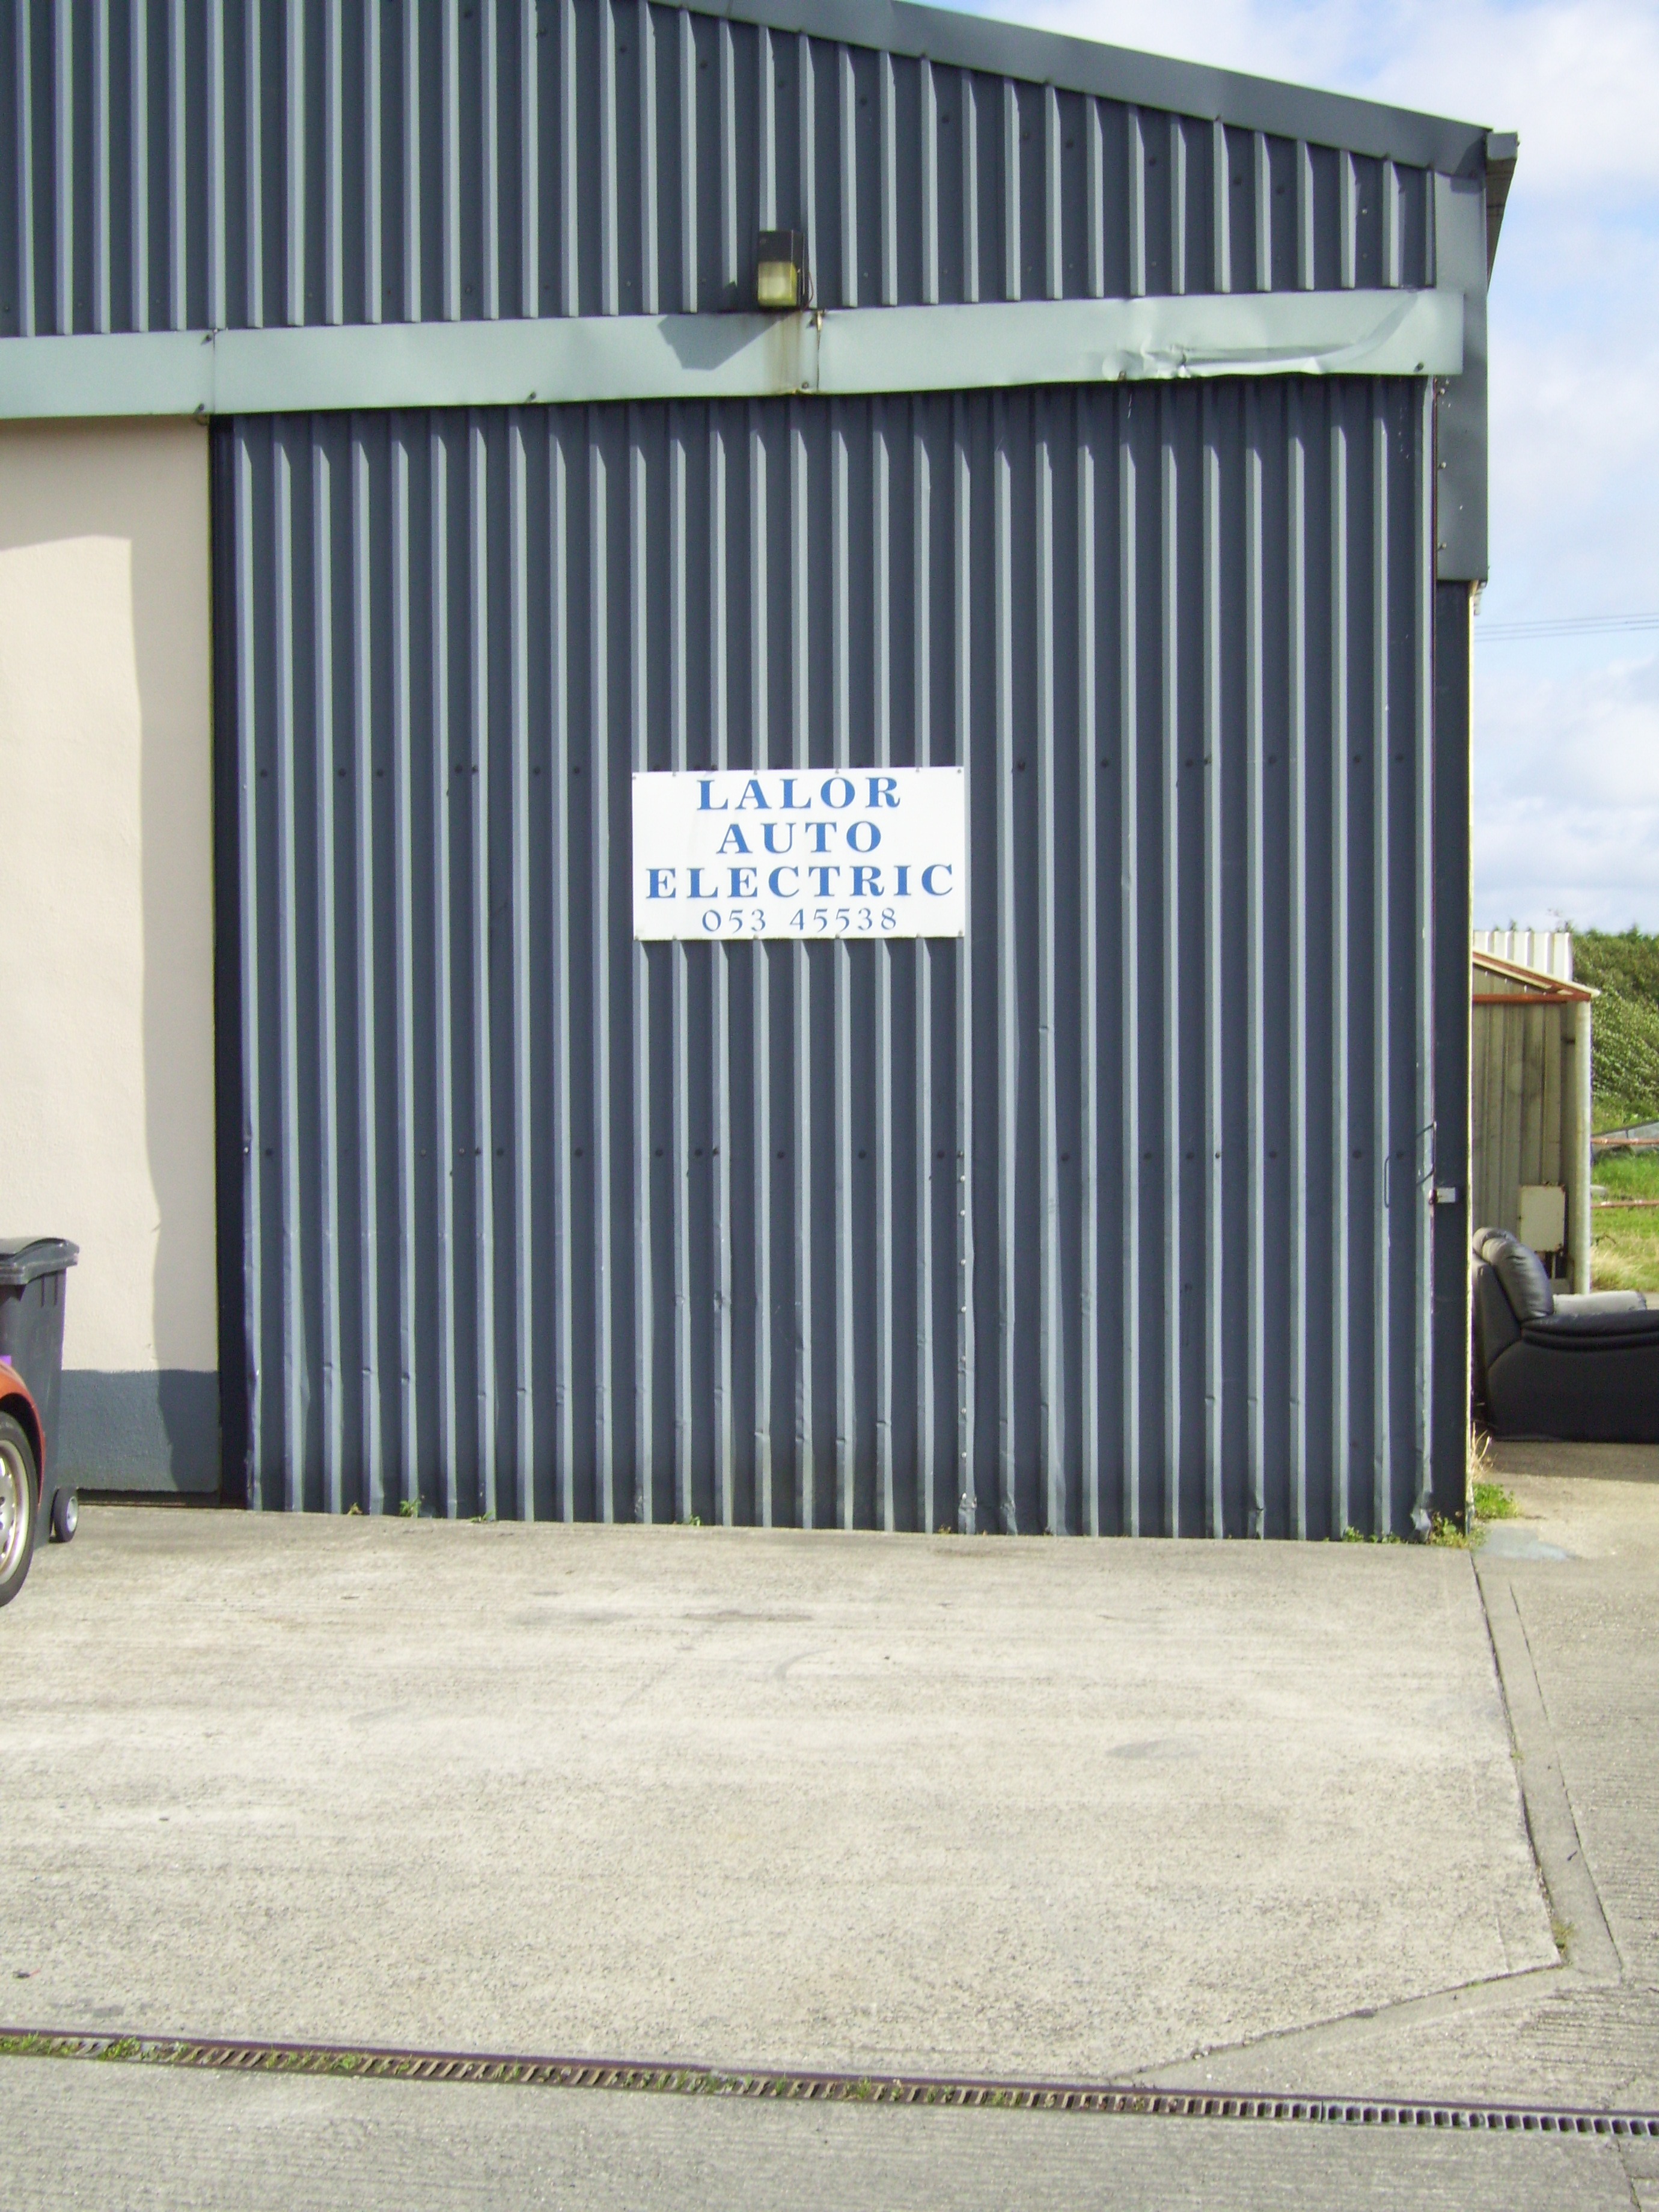 Lalor Auto Electrics in Wexford